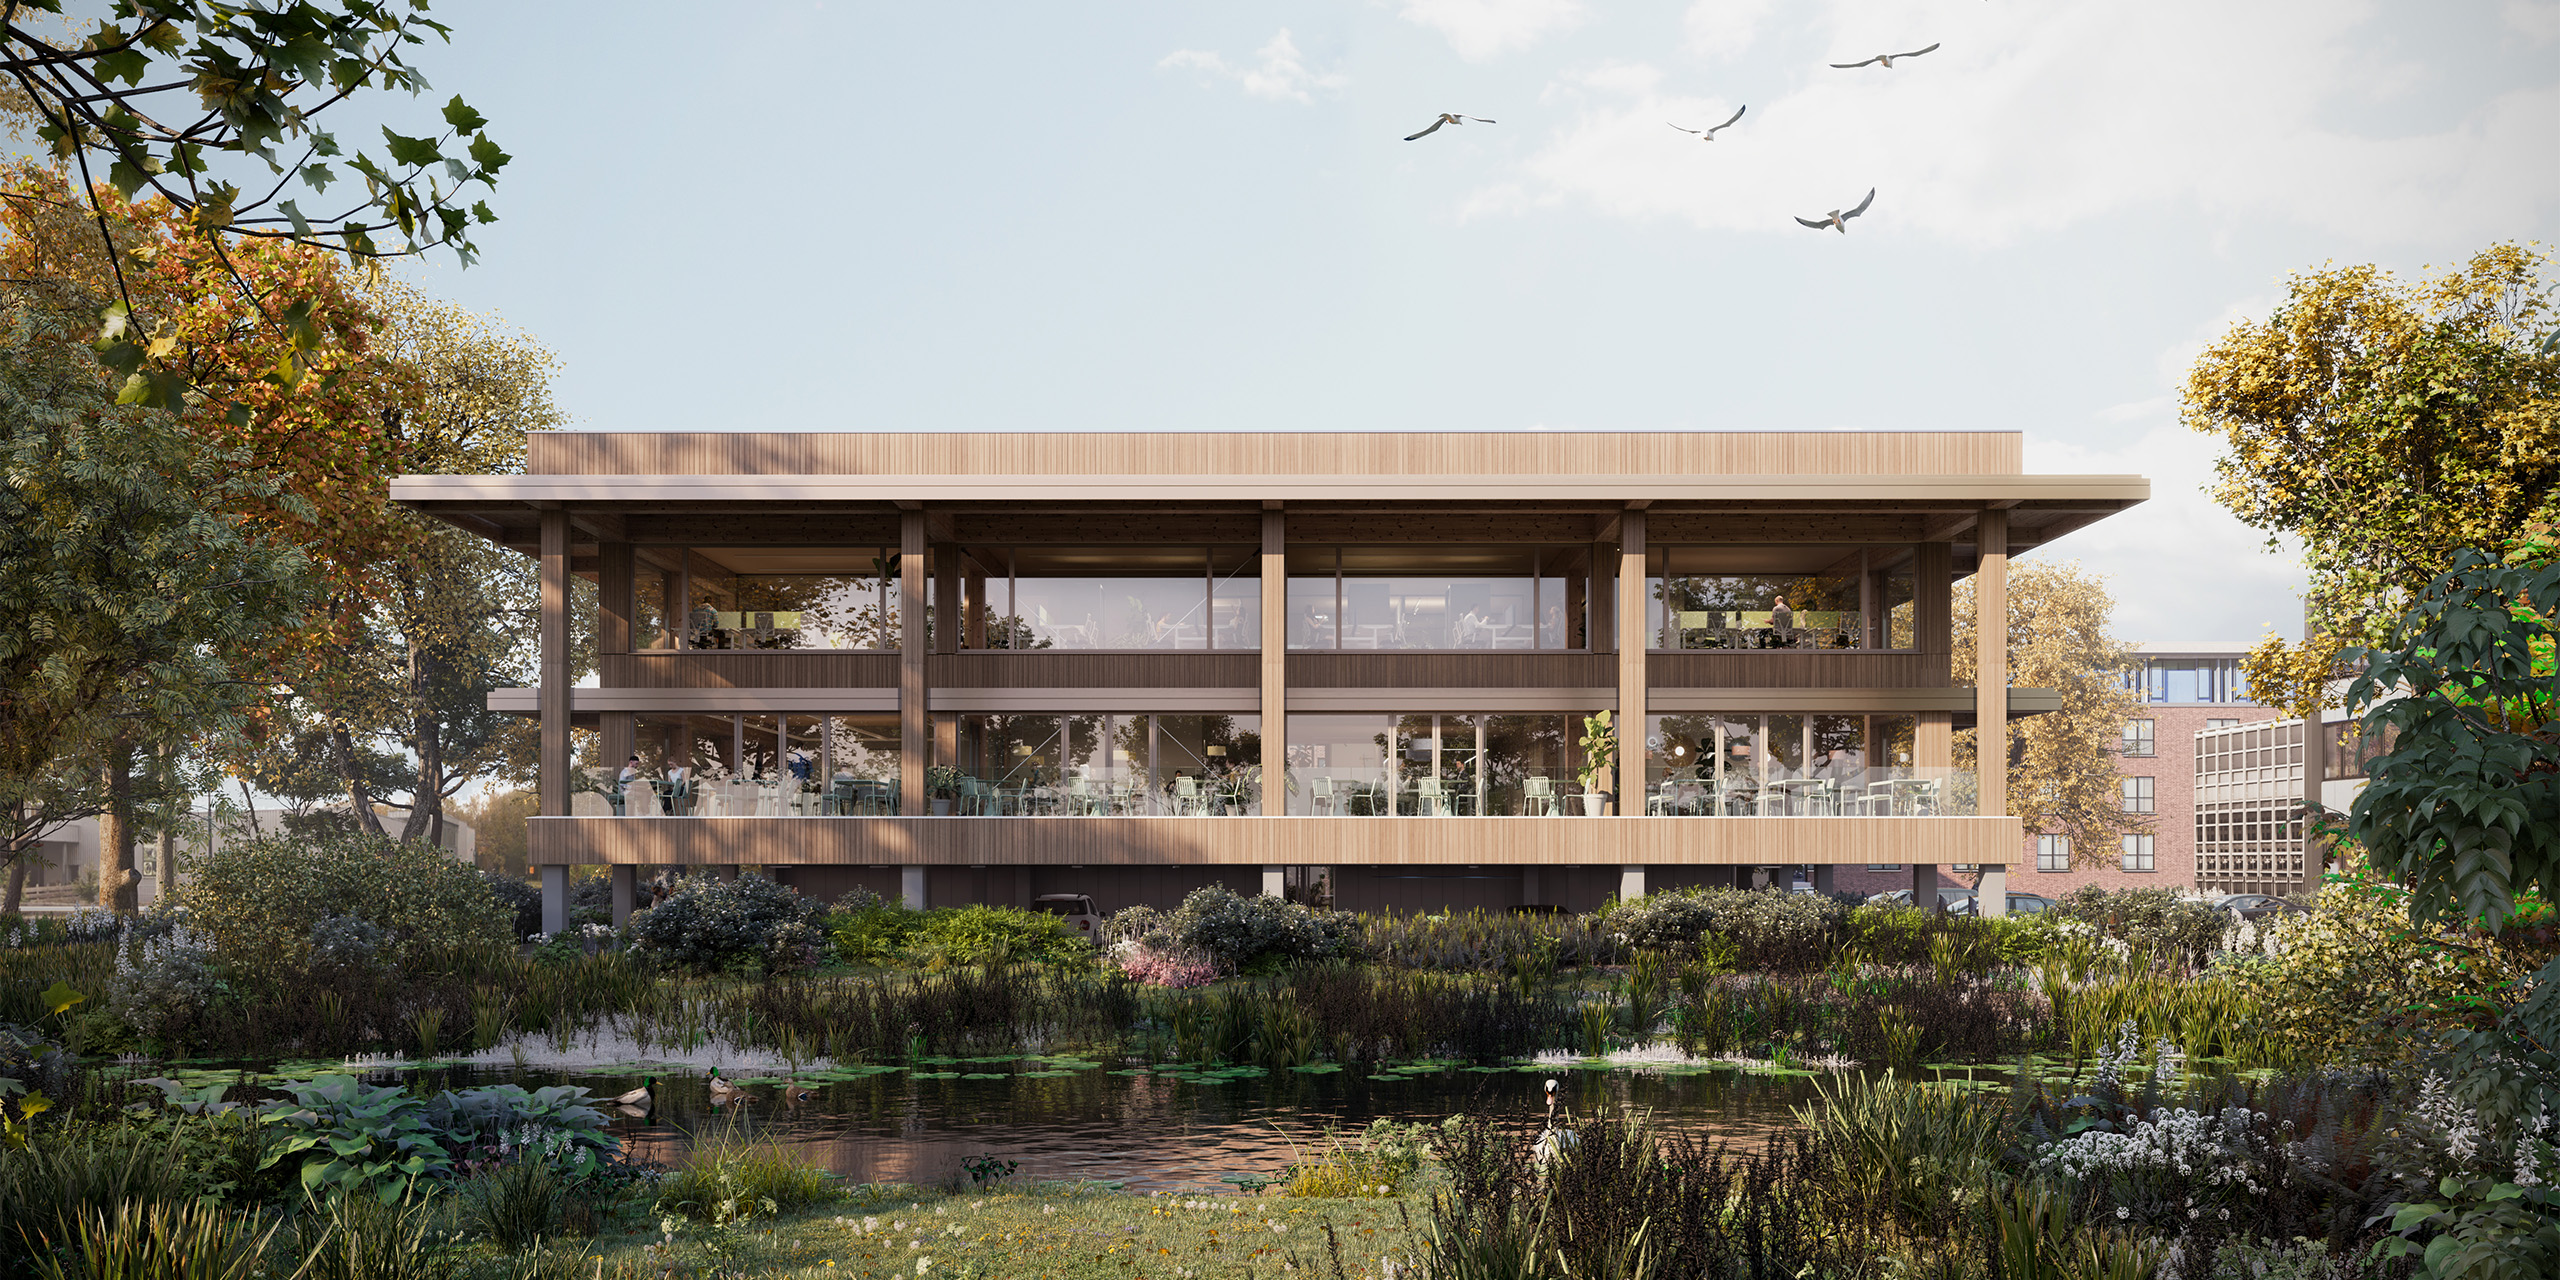 Sustainable wooden Fundis House
breaking ground >